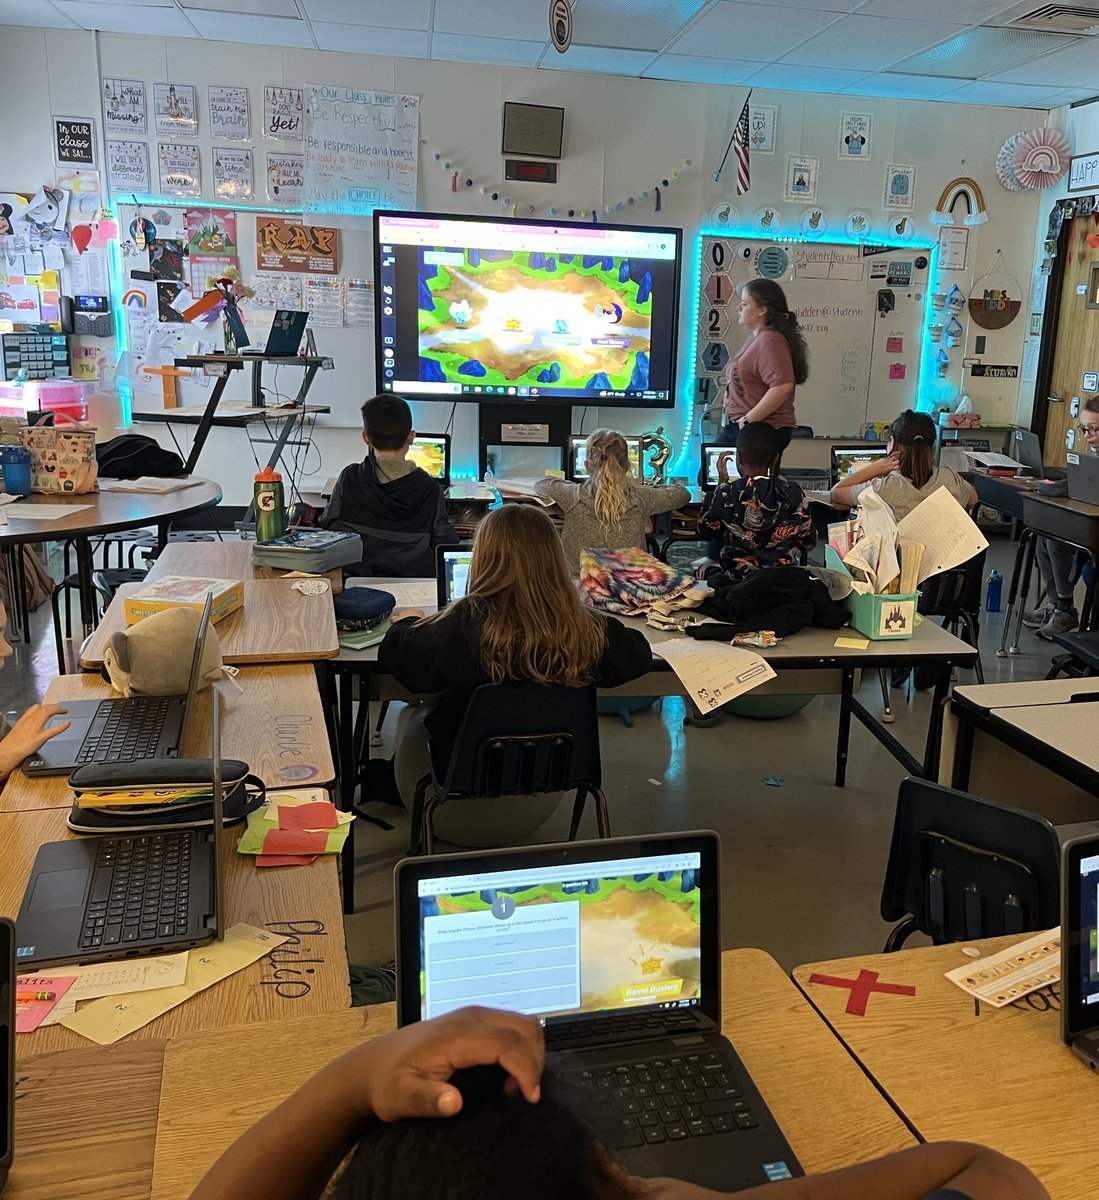 What a fun day getting to share @LumioSocial.The @keheleycomets 3rd Ss loved it and were great creators today sharing so many original ideas while learning the tools. And of course Monster Quiz is always a hit! #CobbInTech @SMART_Tech